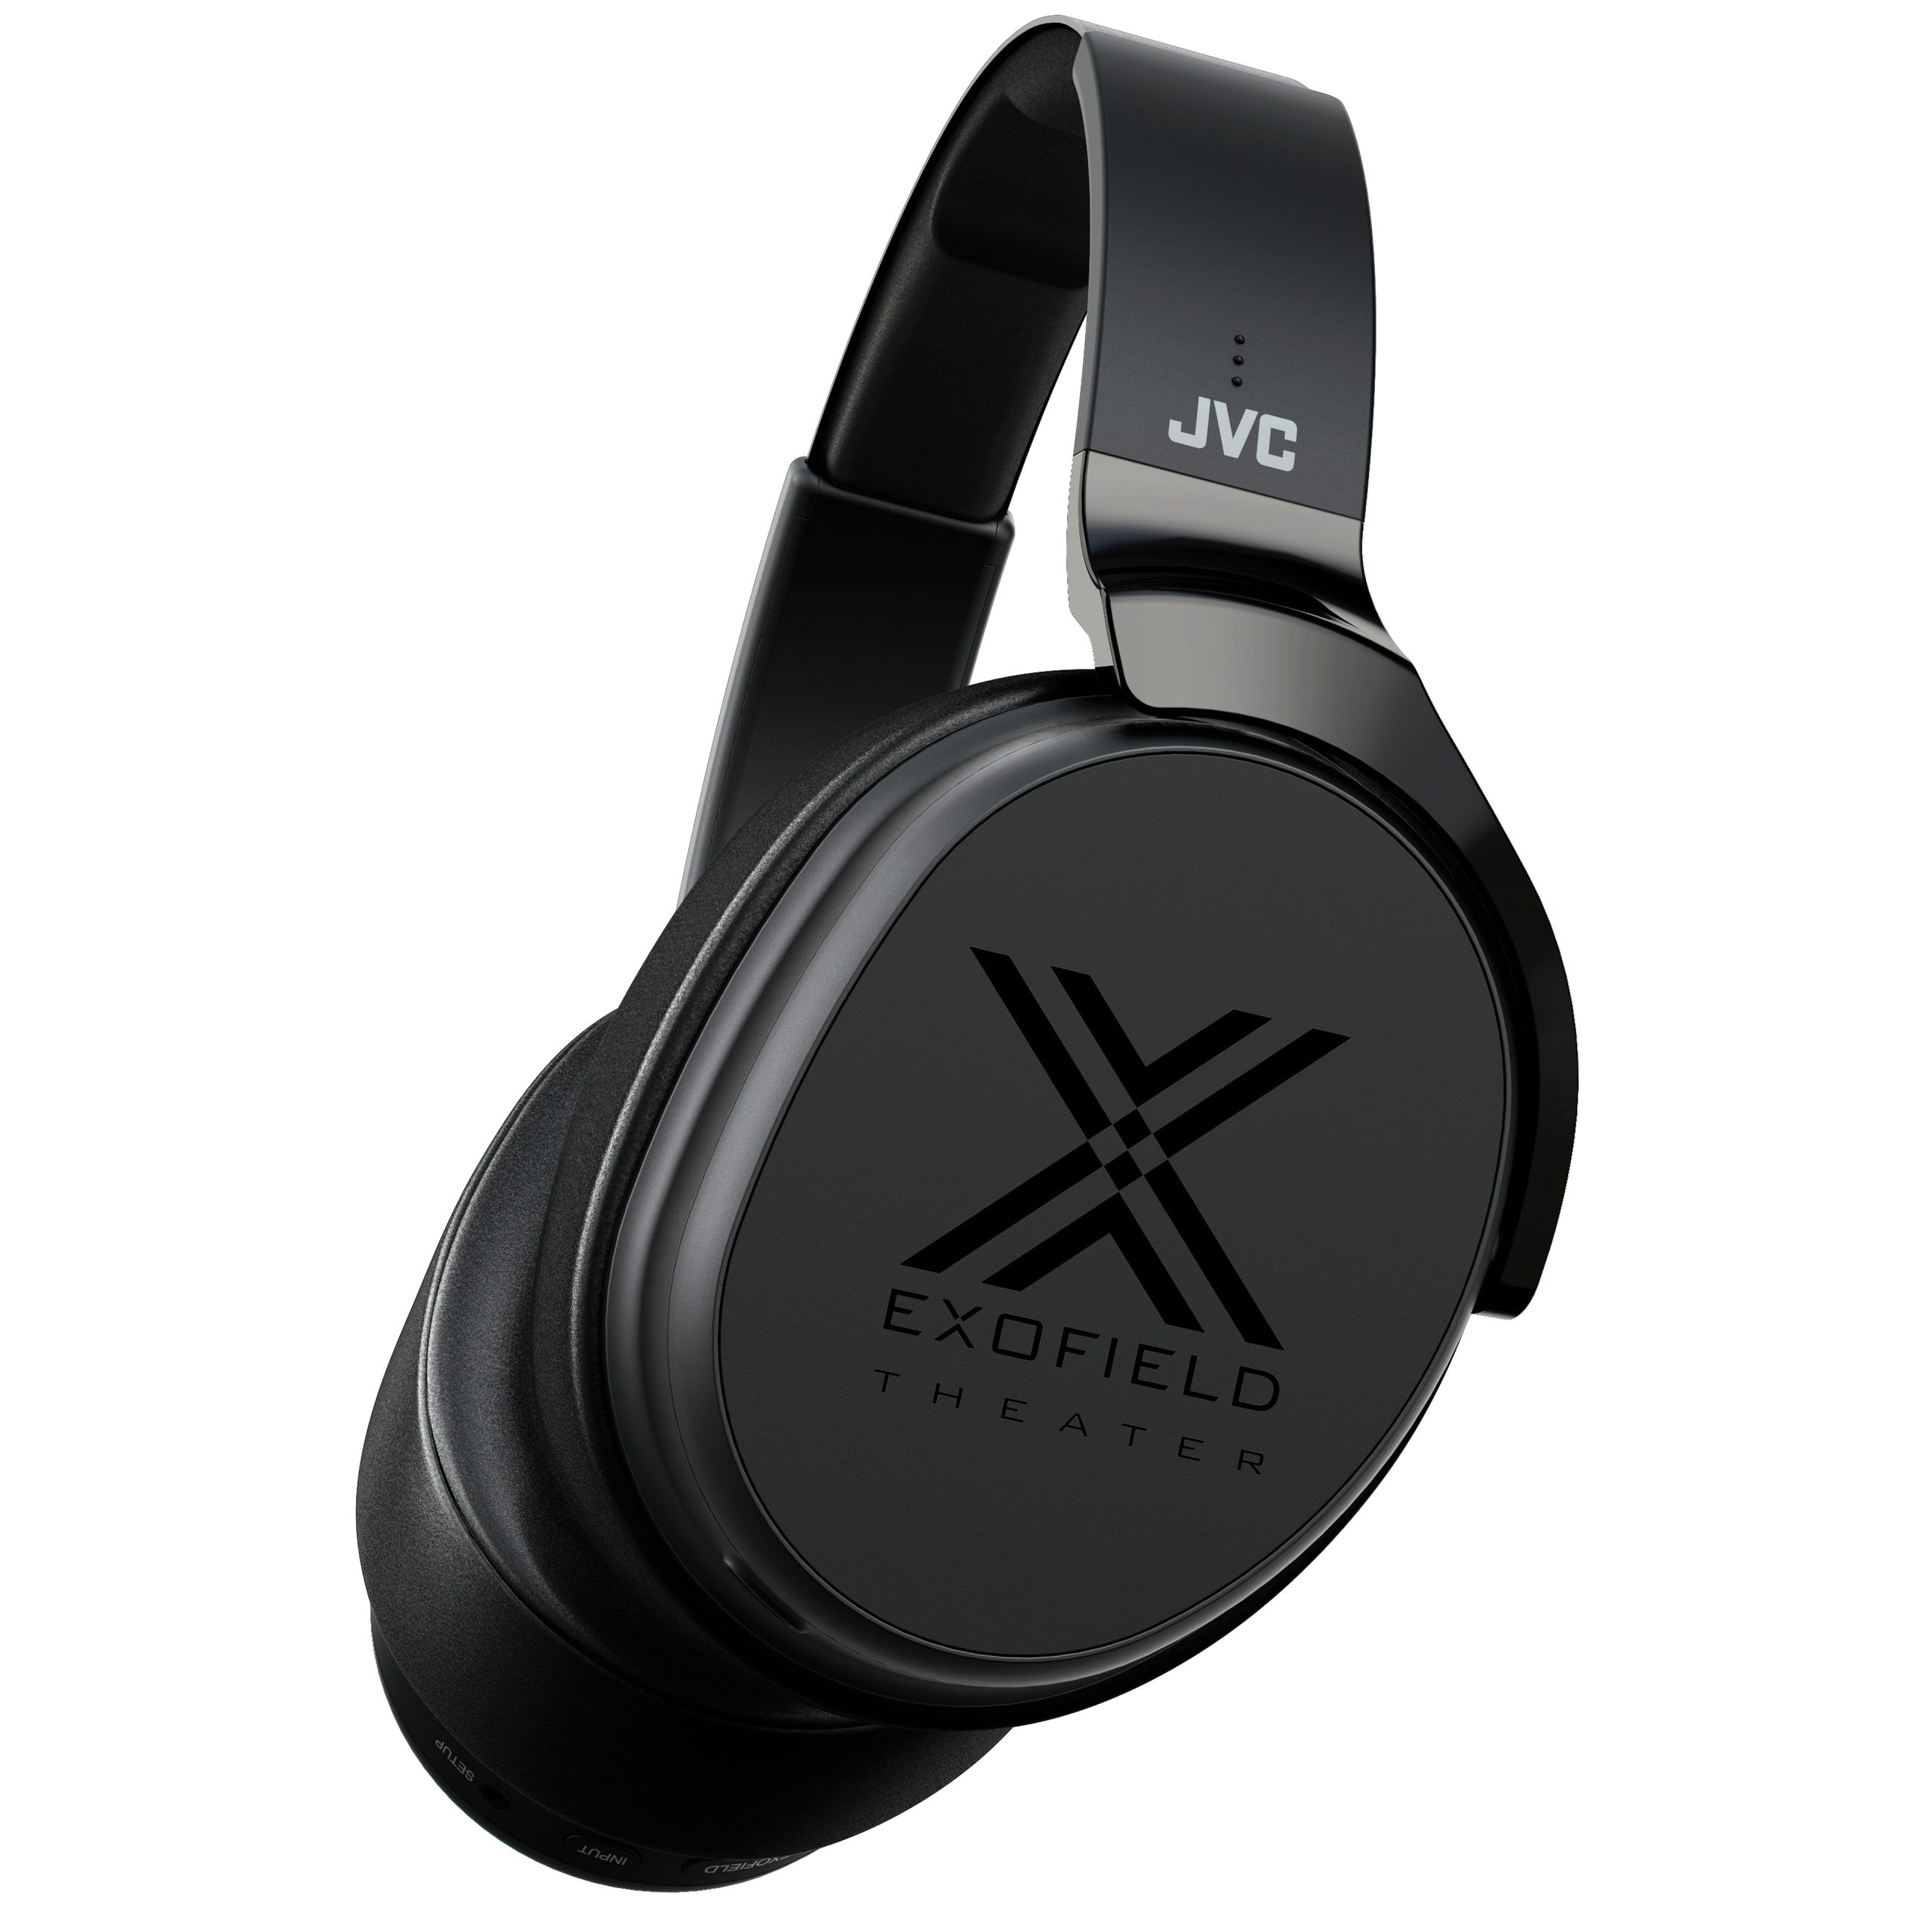 Review: JVC XP-EXT1 | Home Cinema With Surround Sound Right In The 